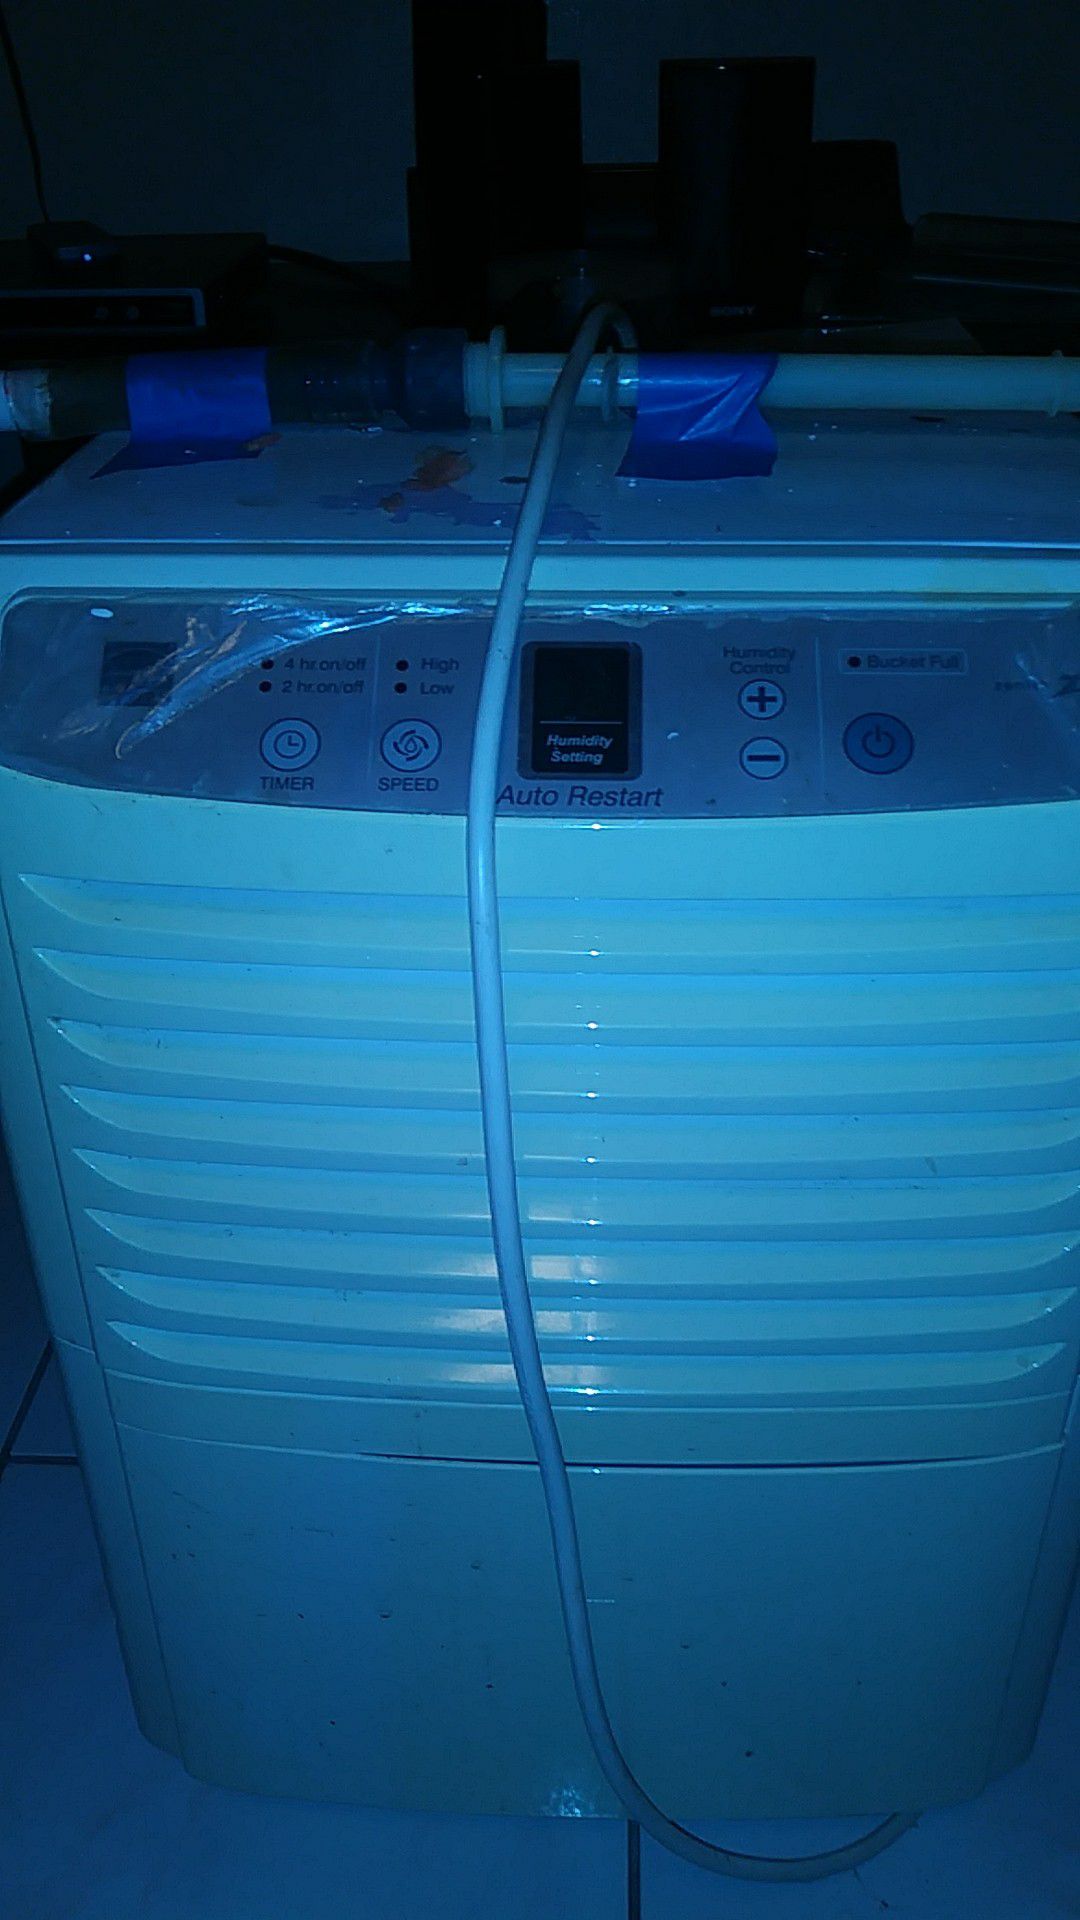 3 Humidifiers for sale